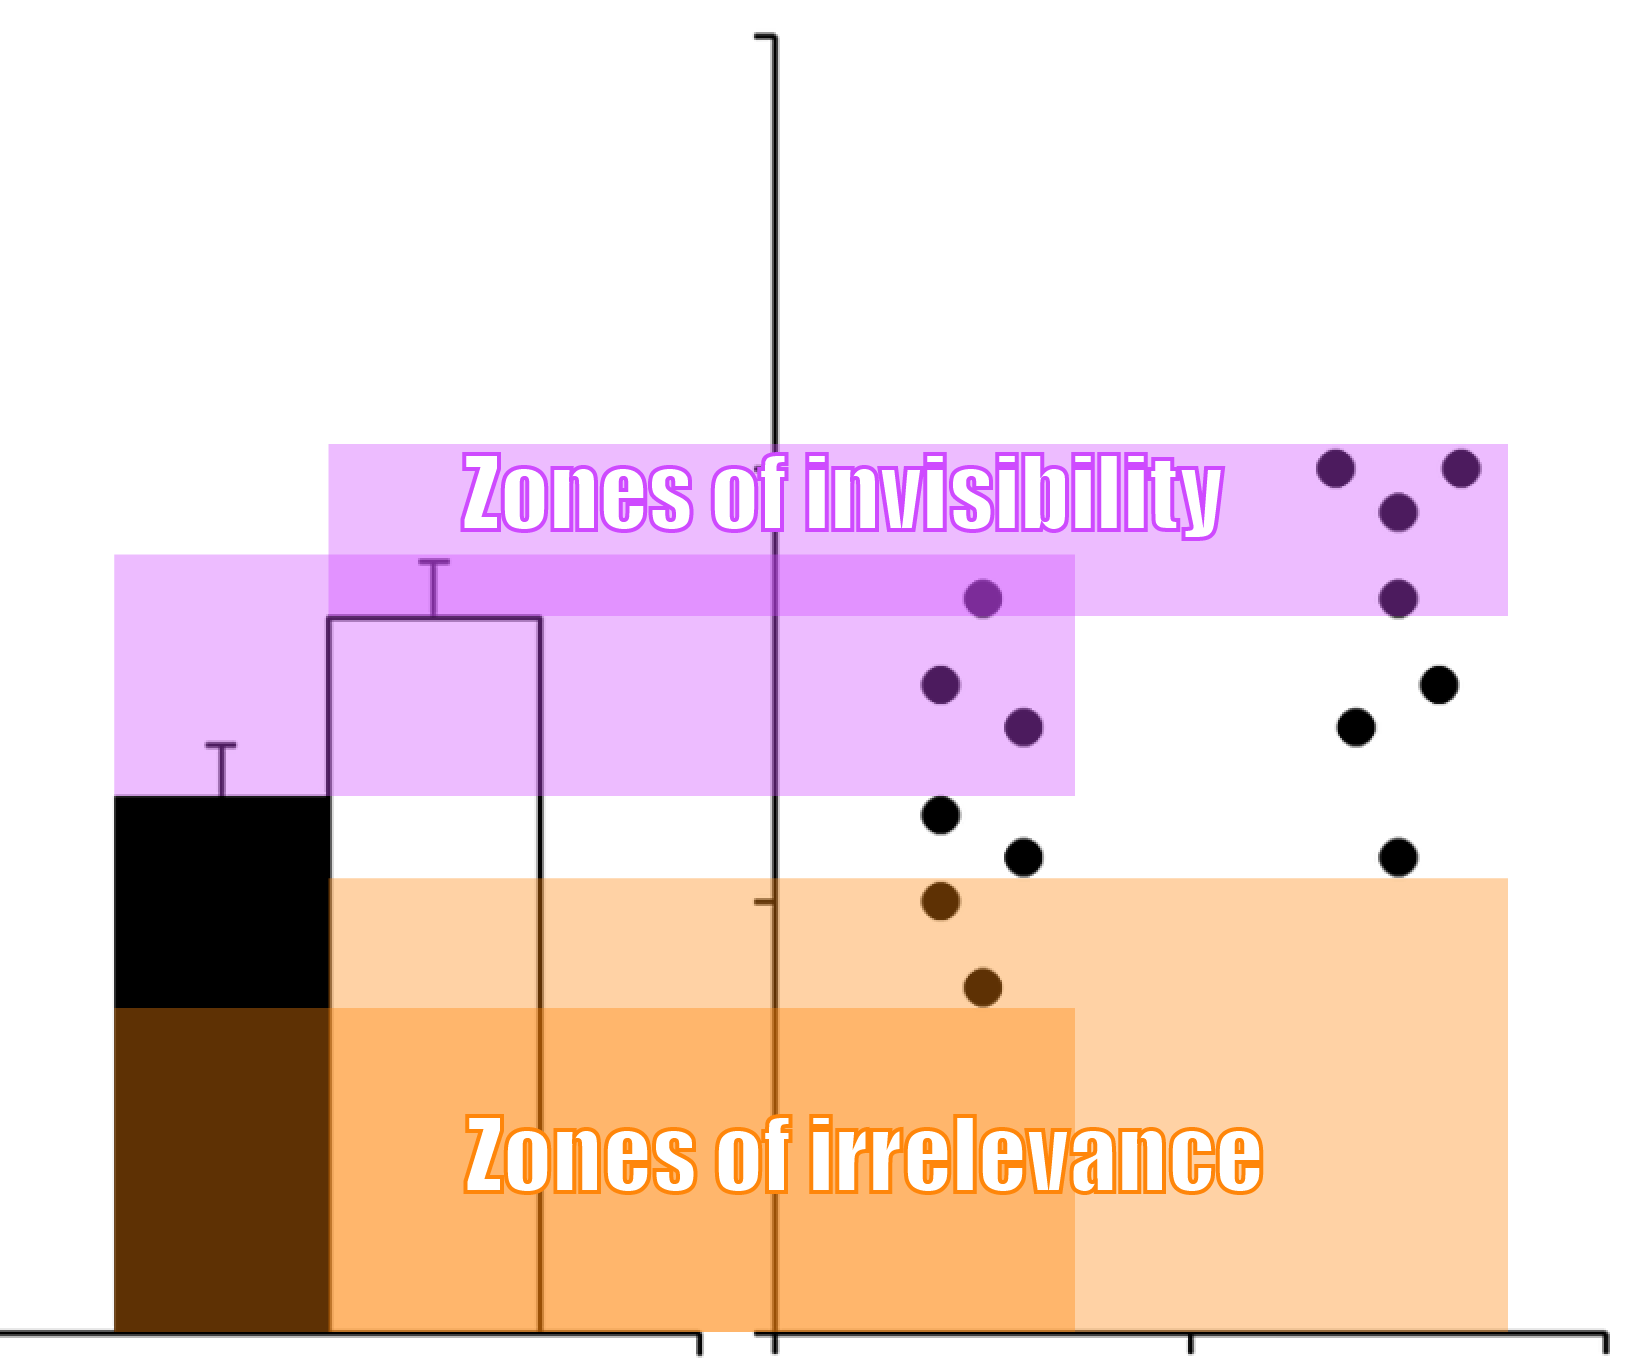 The same graphic as above, with annotations for the Zones of invisibility and the Zones of irrelevance